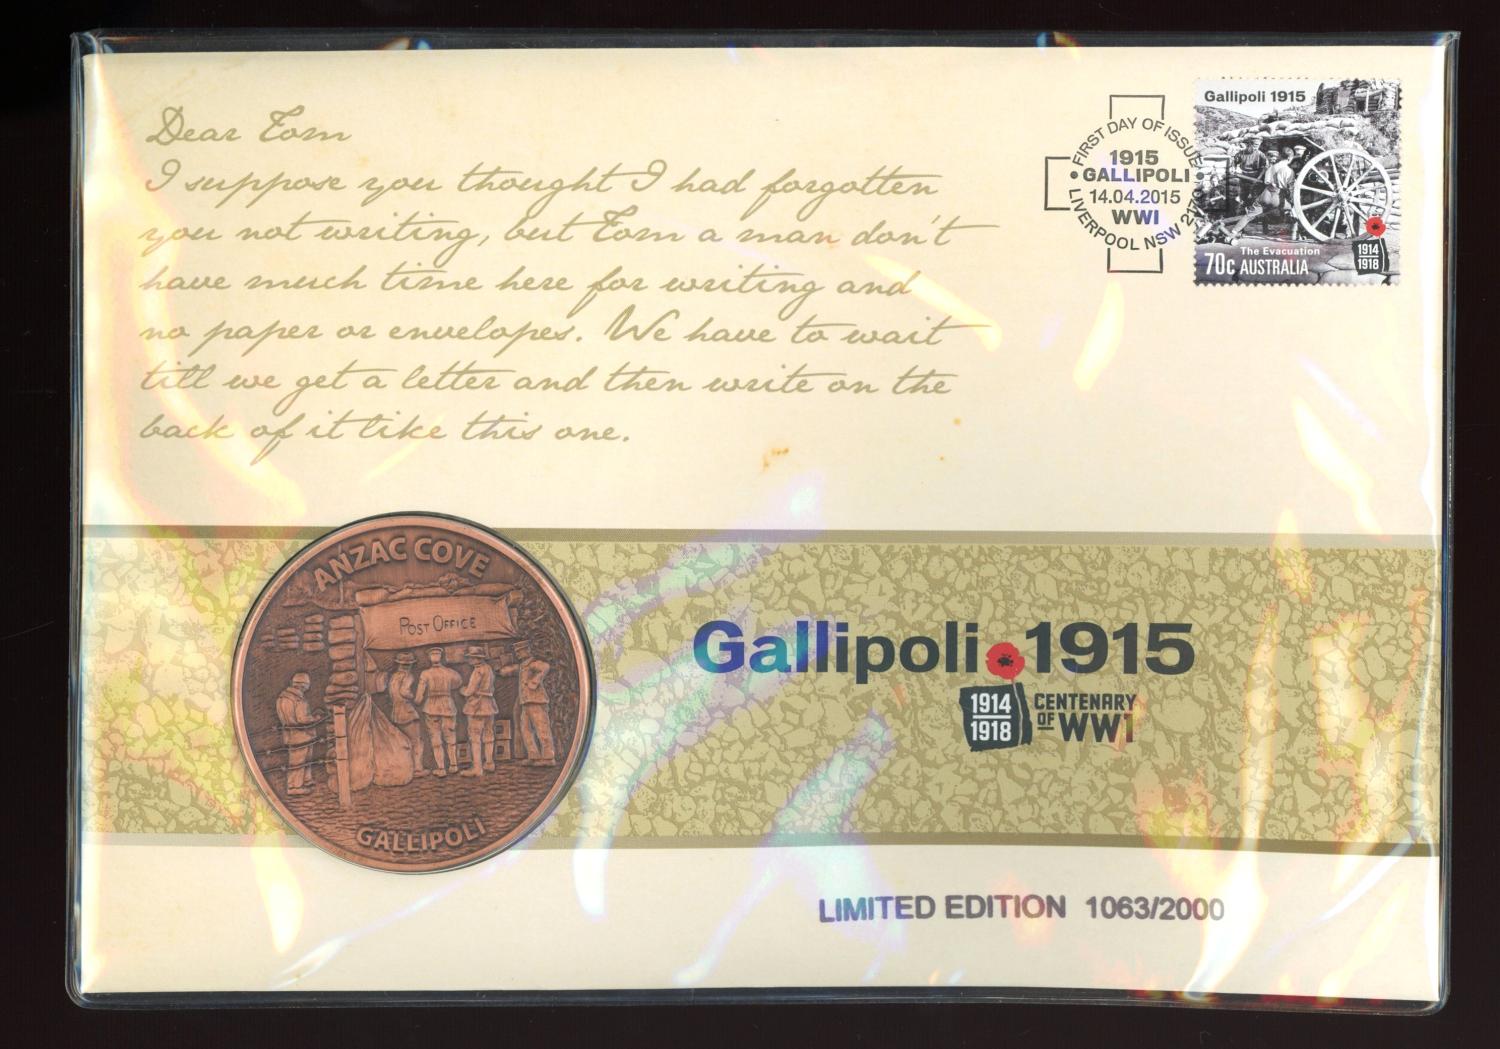 Thumbnail for 2015 Issue 08 Gallipoli Centenary of WWI  Medallic PNC